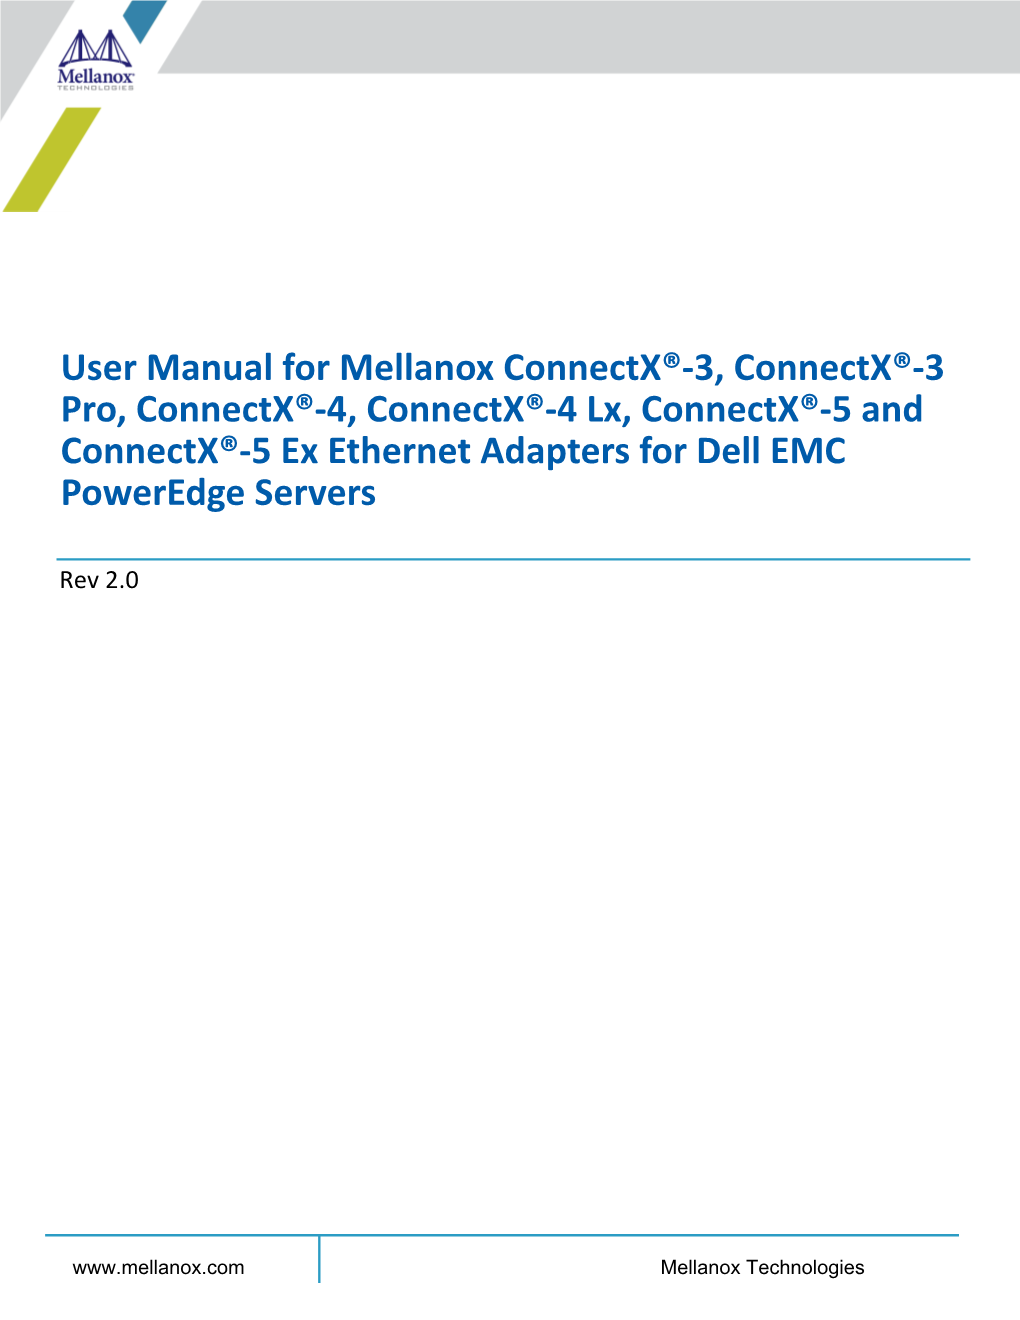 User Manual for Mellanox Connectx 3 Connectx 3 Pro Connectx 4 and Connectx 4 Lx Ethernet Adapters for Dell EMC Poweredge Servers